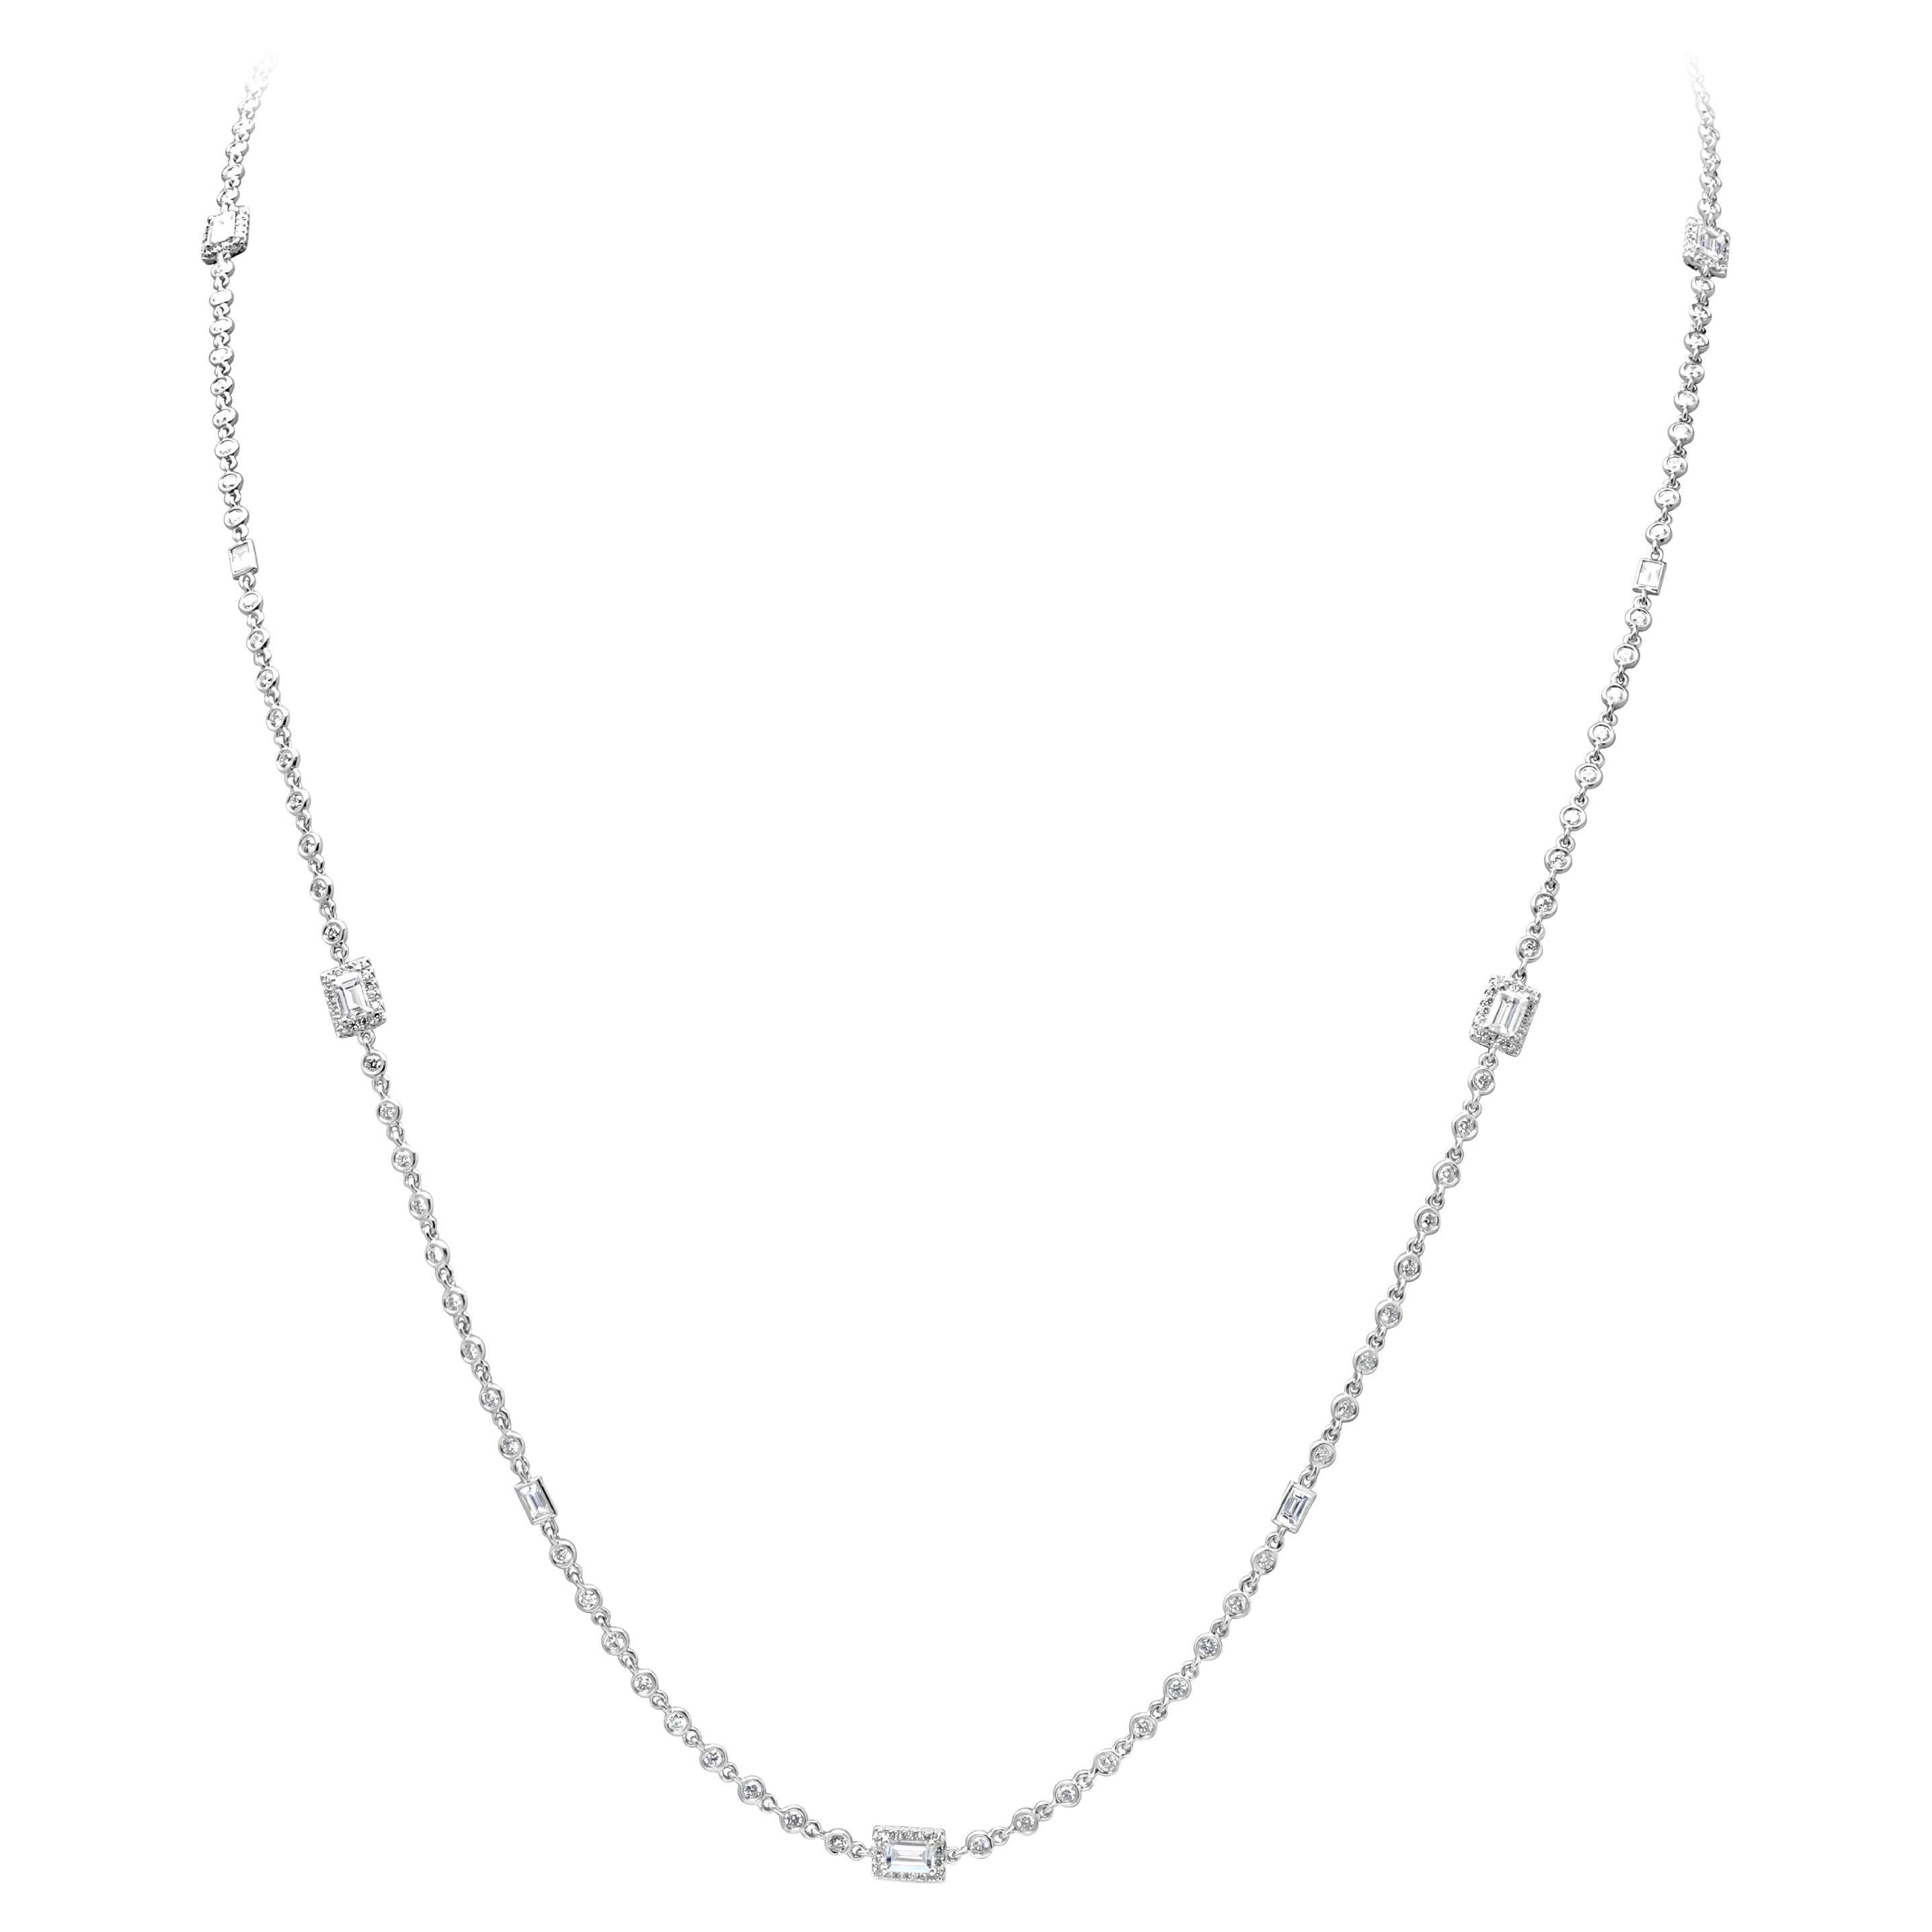 6.54 Carats Total Baguette and Round Cut Diamonds by the Yard Line Necklace For Sale